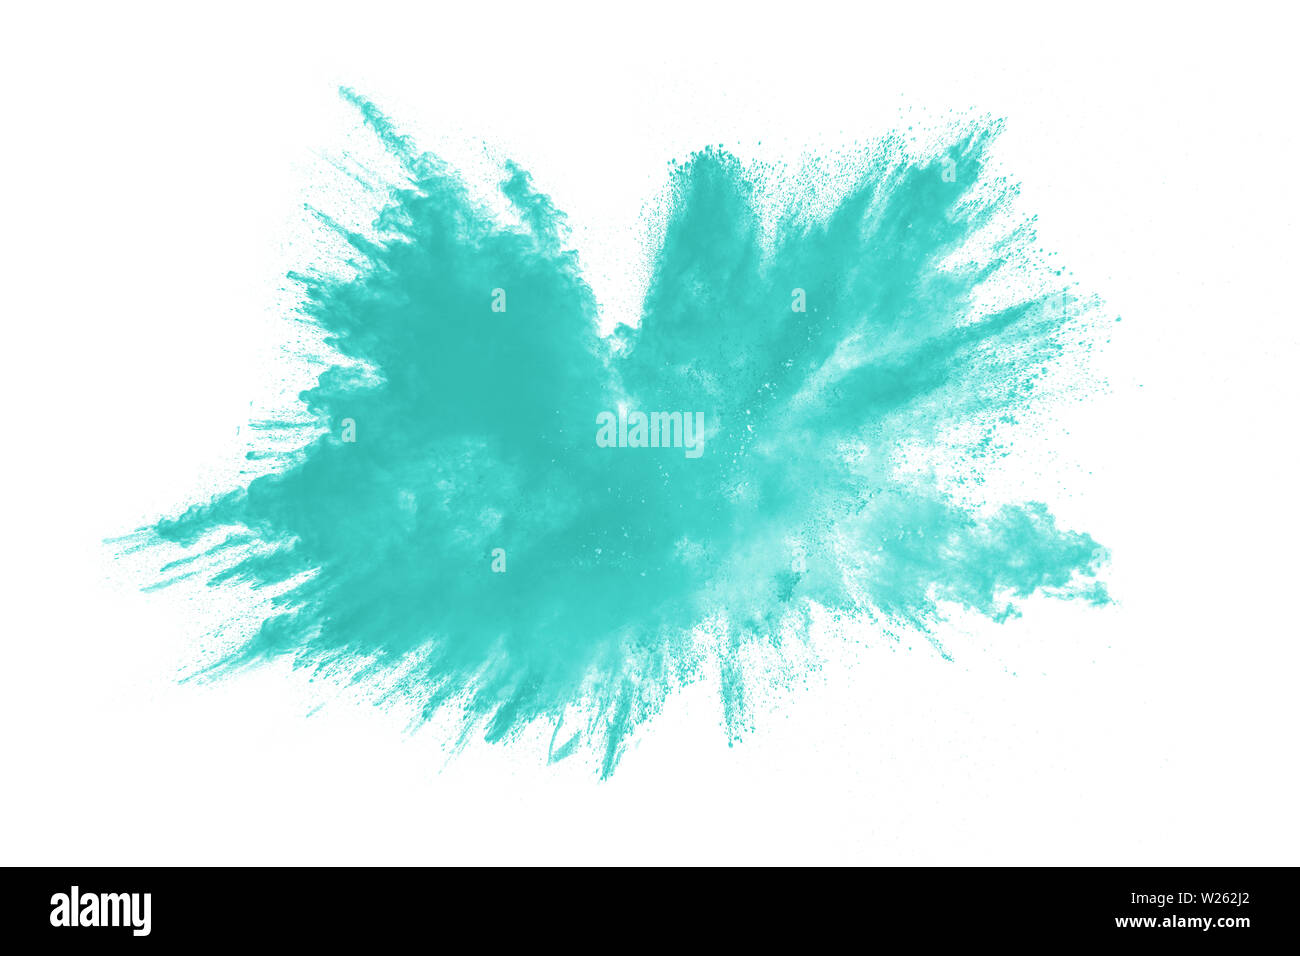 Green dust splash.Green color powder explosion cloud on white background. Stock Photo